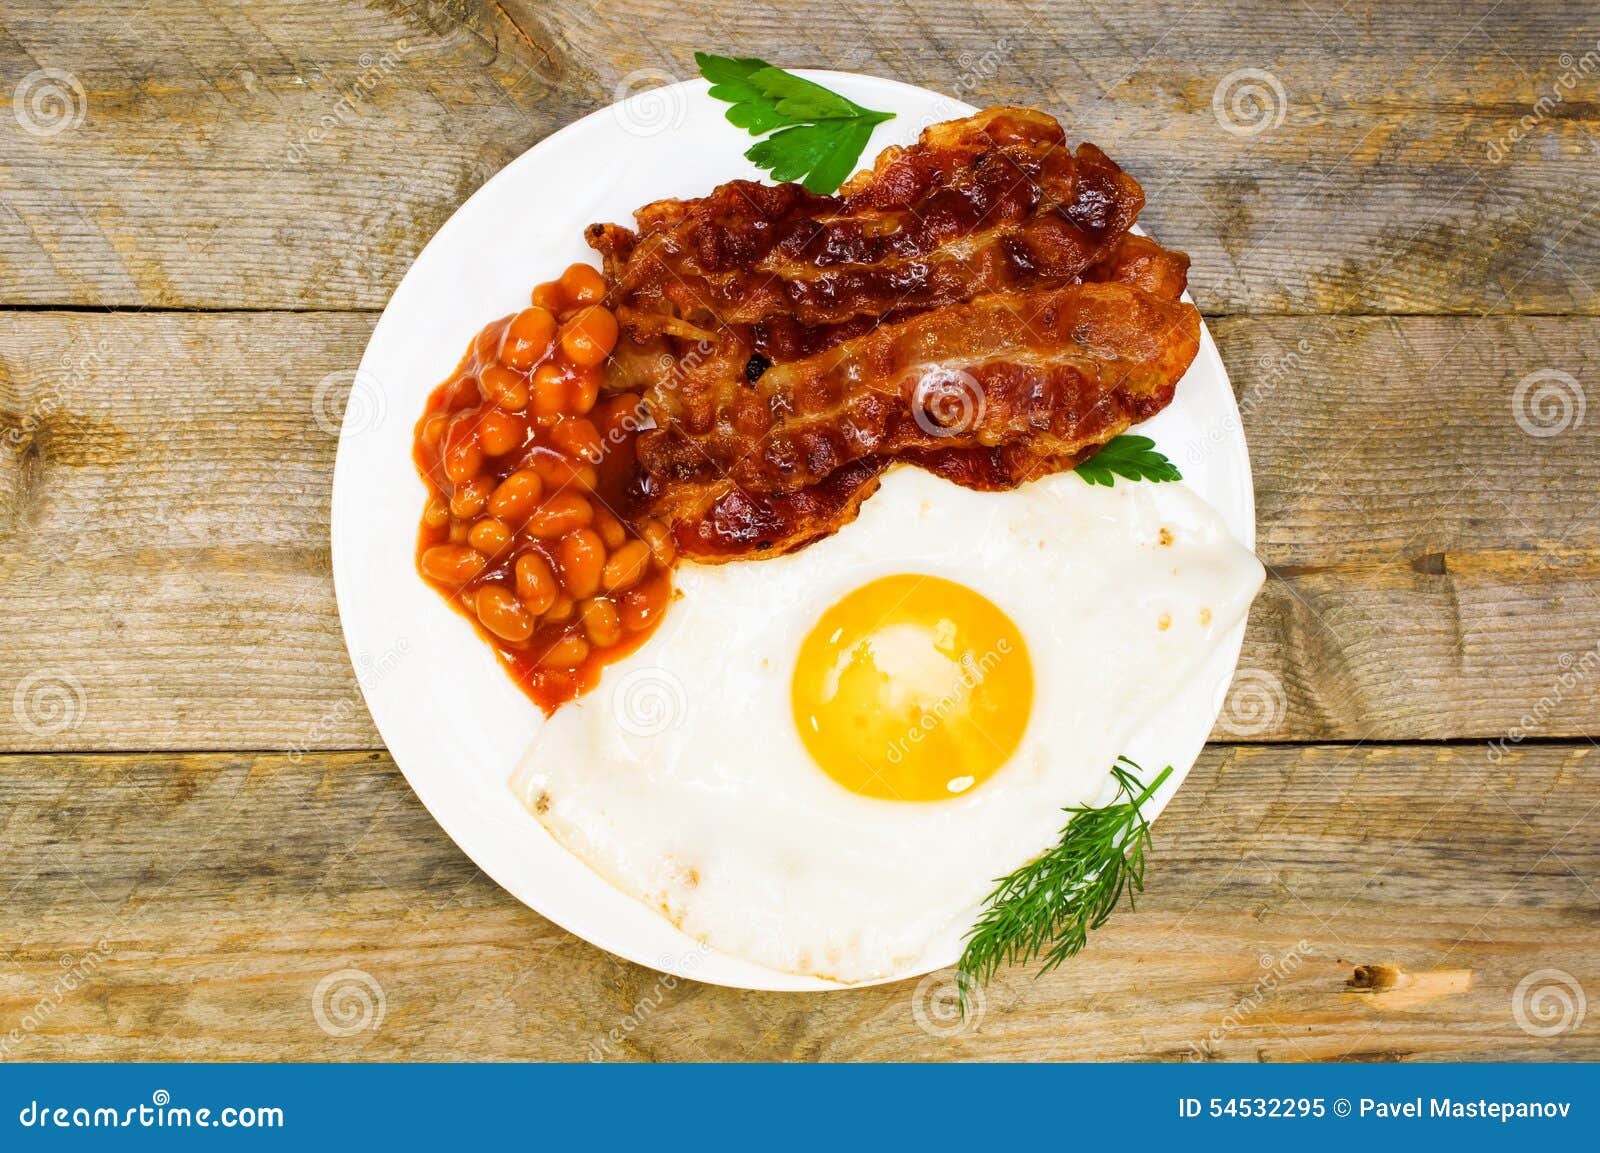 Fried Eggs with Bacon and Beans Stock Image - Image of plate, beans ...